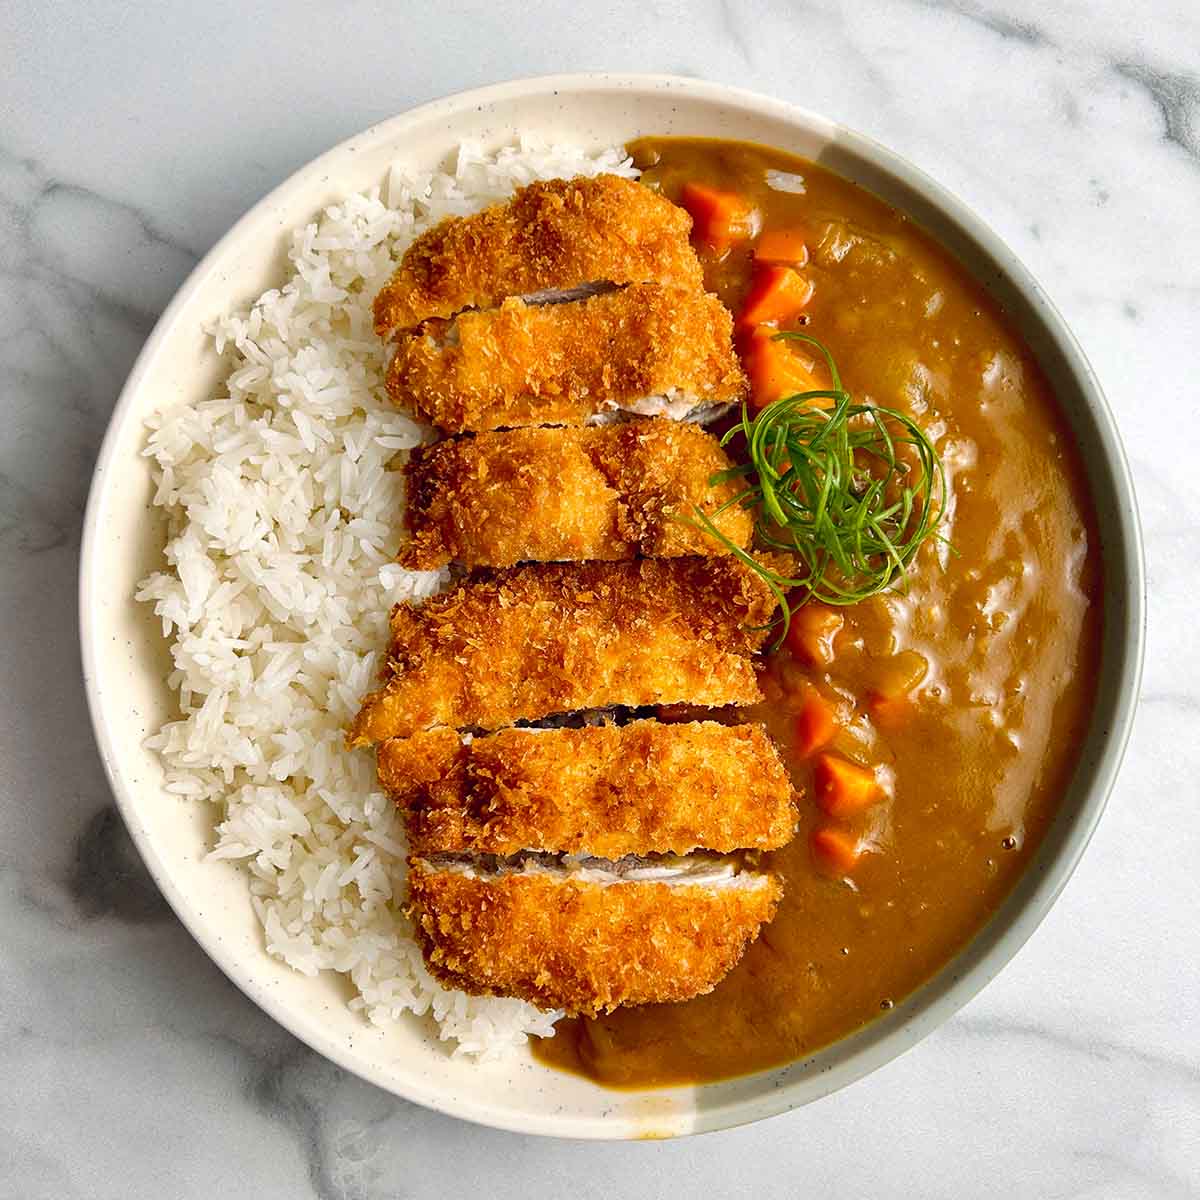 A very tasty looking bowl of katsu curry, a japanese curry dish served over fried chicken with a side of rice. in this case, the chicken is vegan!